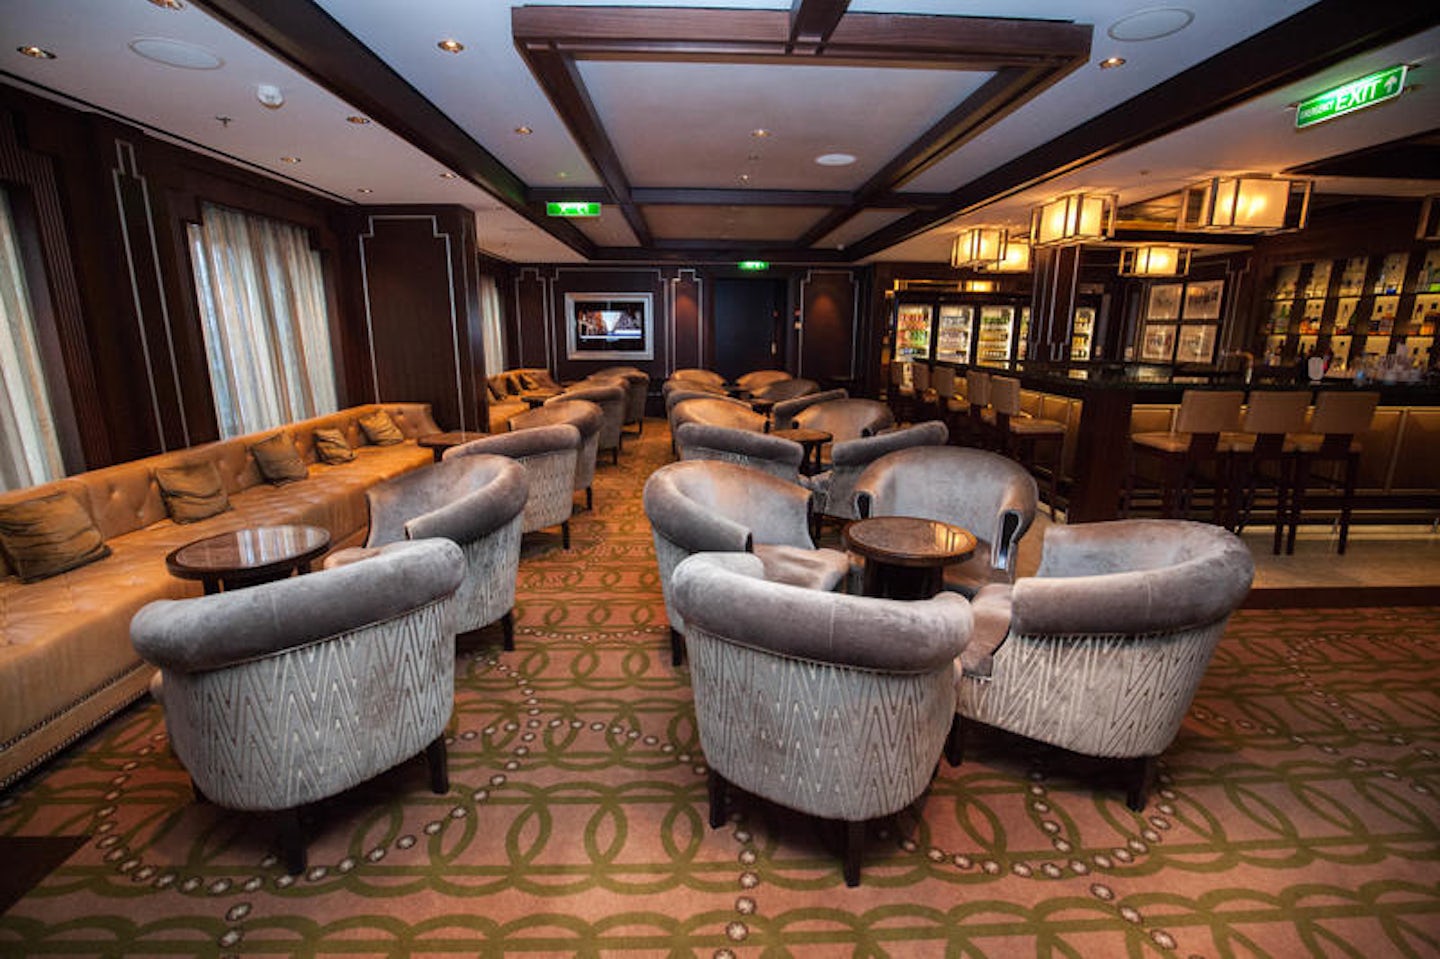 Michael's Club on Celebrity Reflection